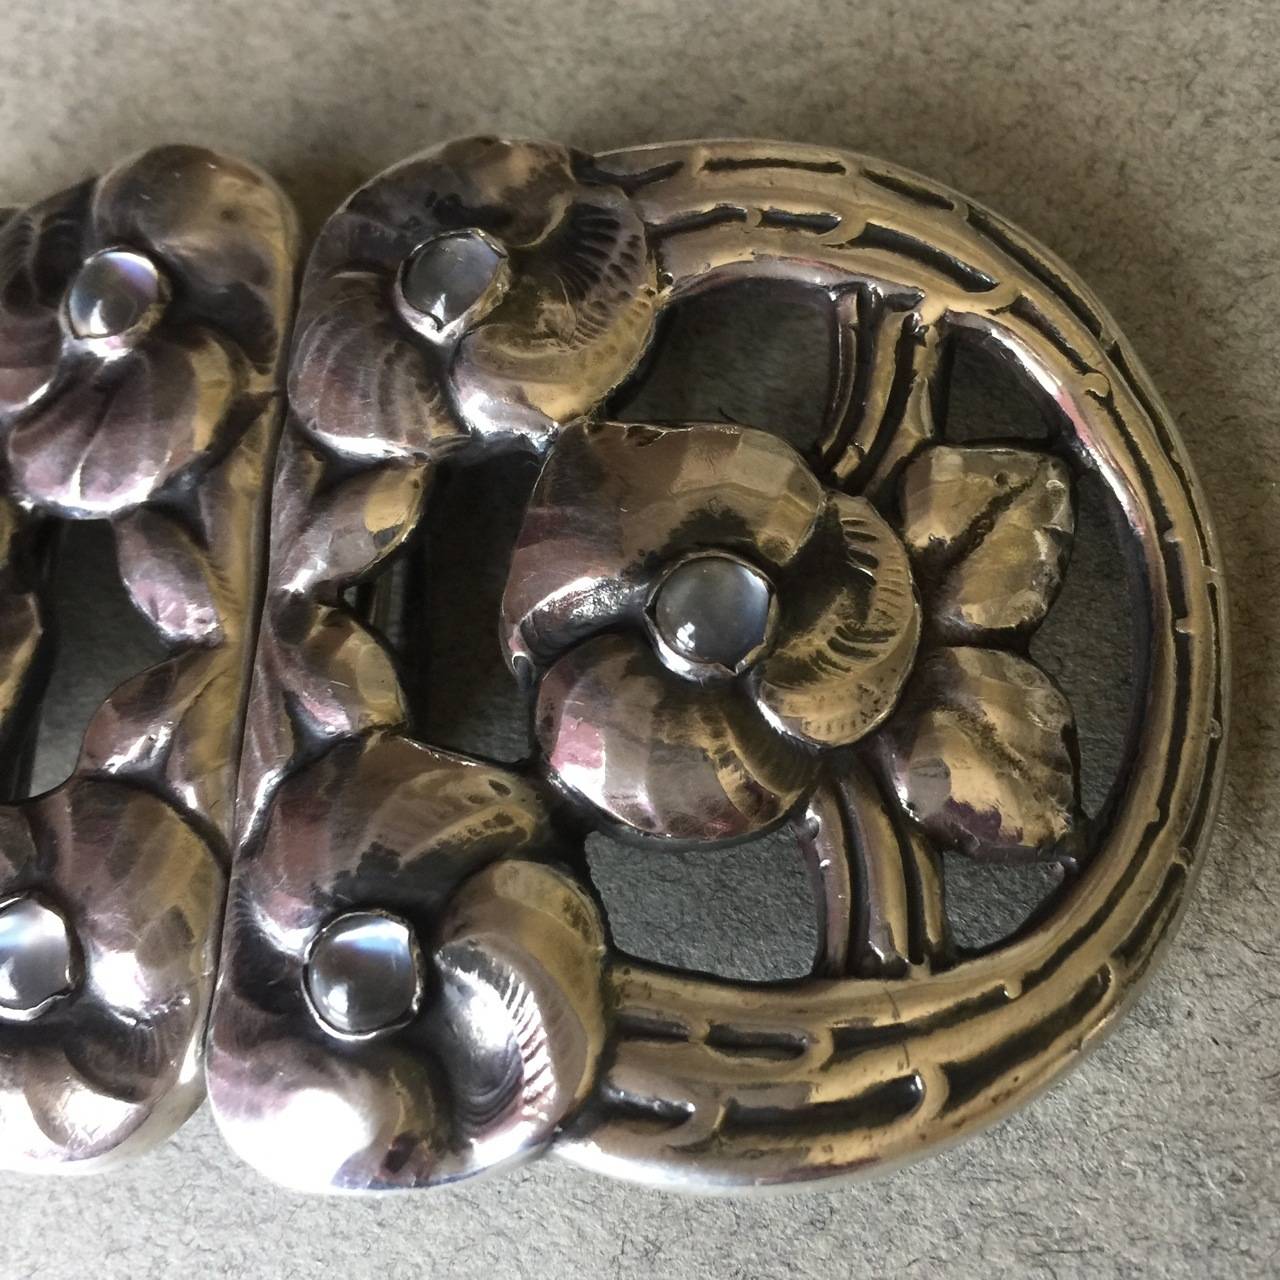 Evald Nielsen Rare Belt Buckle with Moonstones

Evald Nielsen .830 silver belt buckle designed with six lovely flowers with a bright, lively moonstone in the center of each.   

This rare find was produced in the 1920's. It is in excellent condition